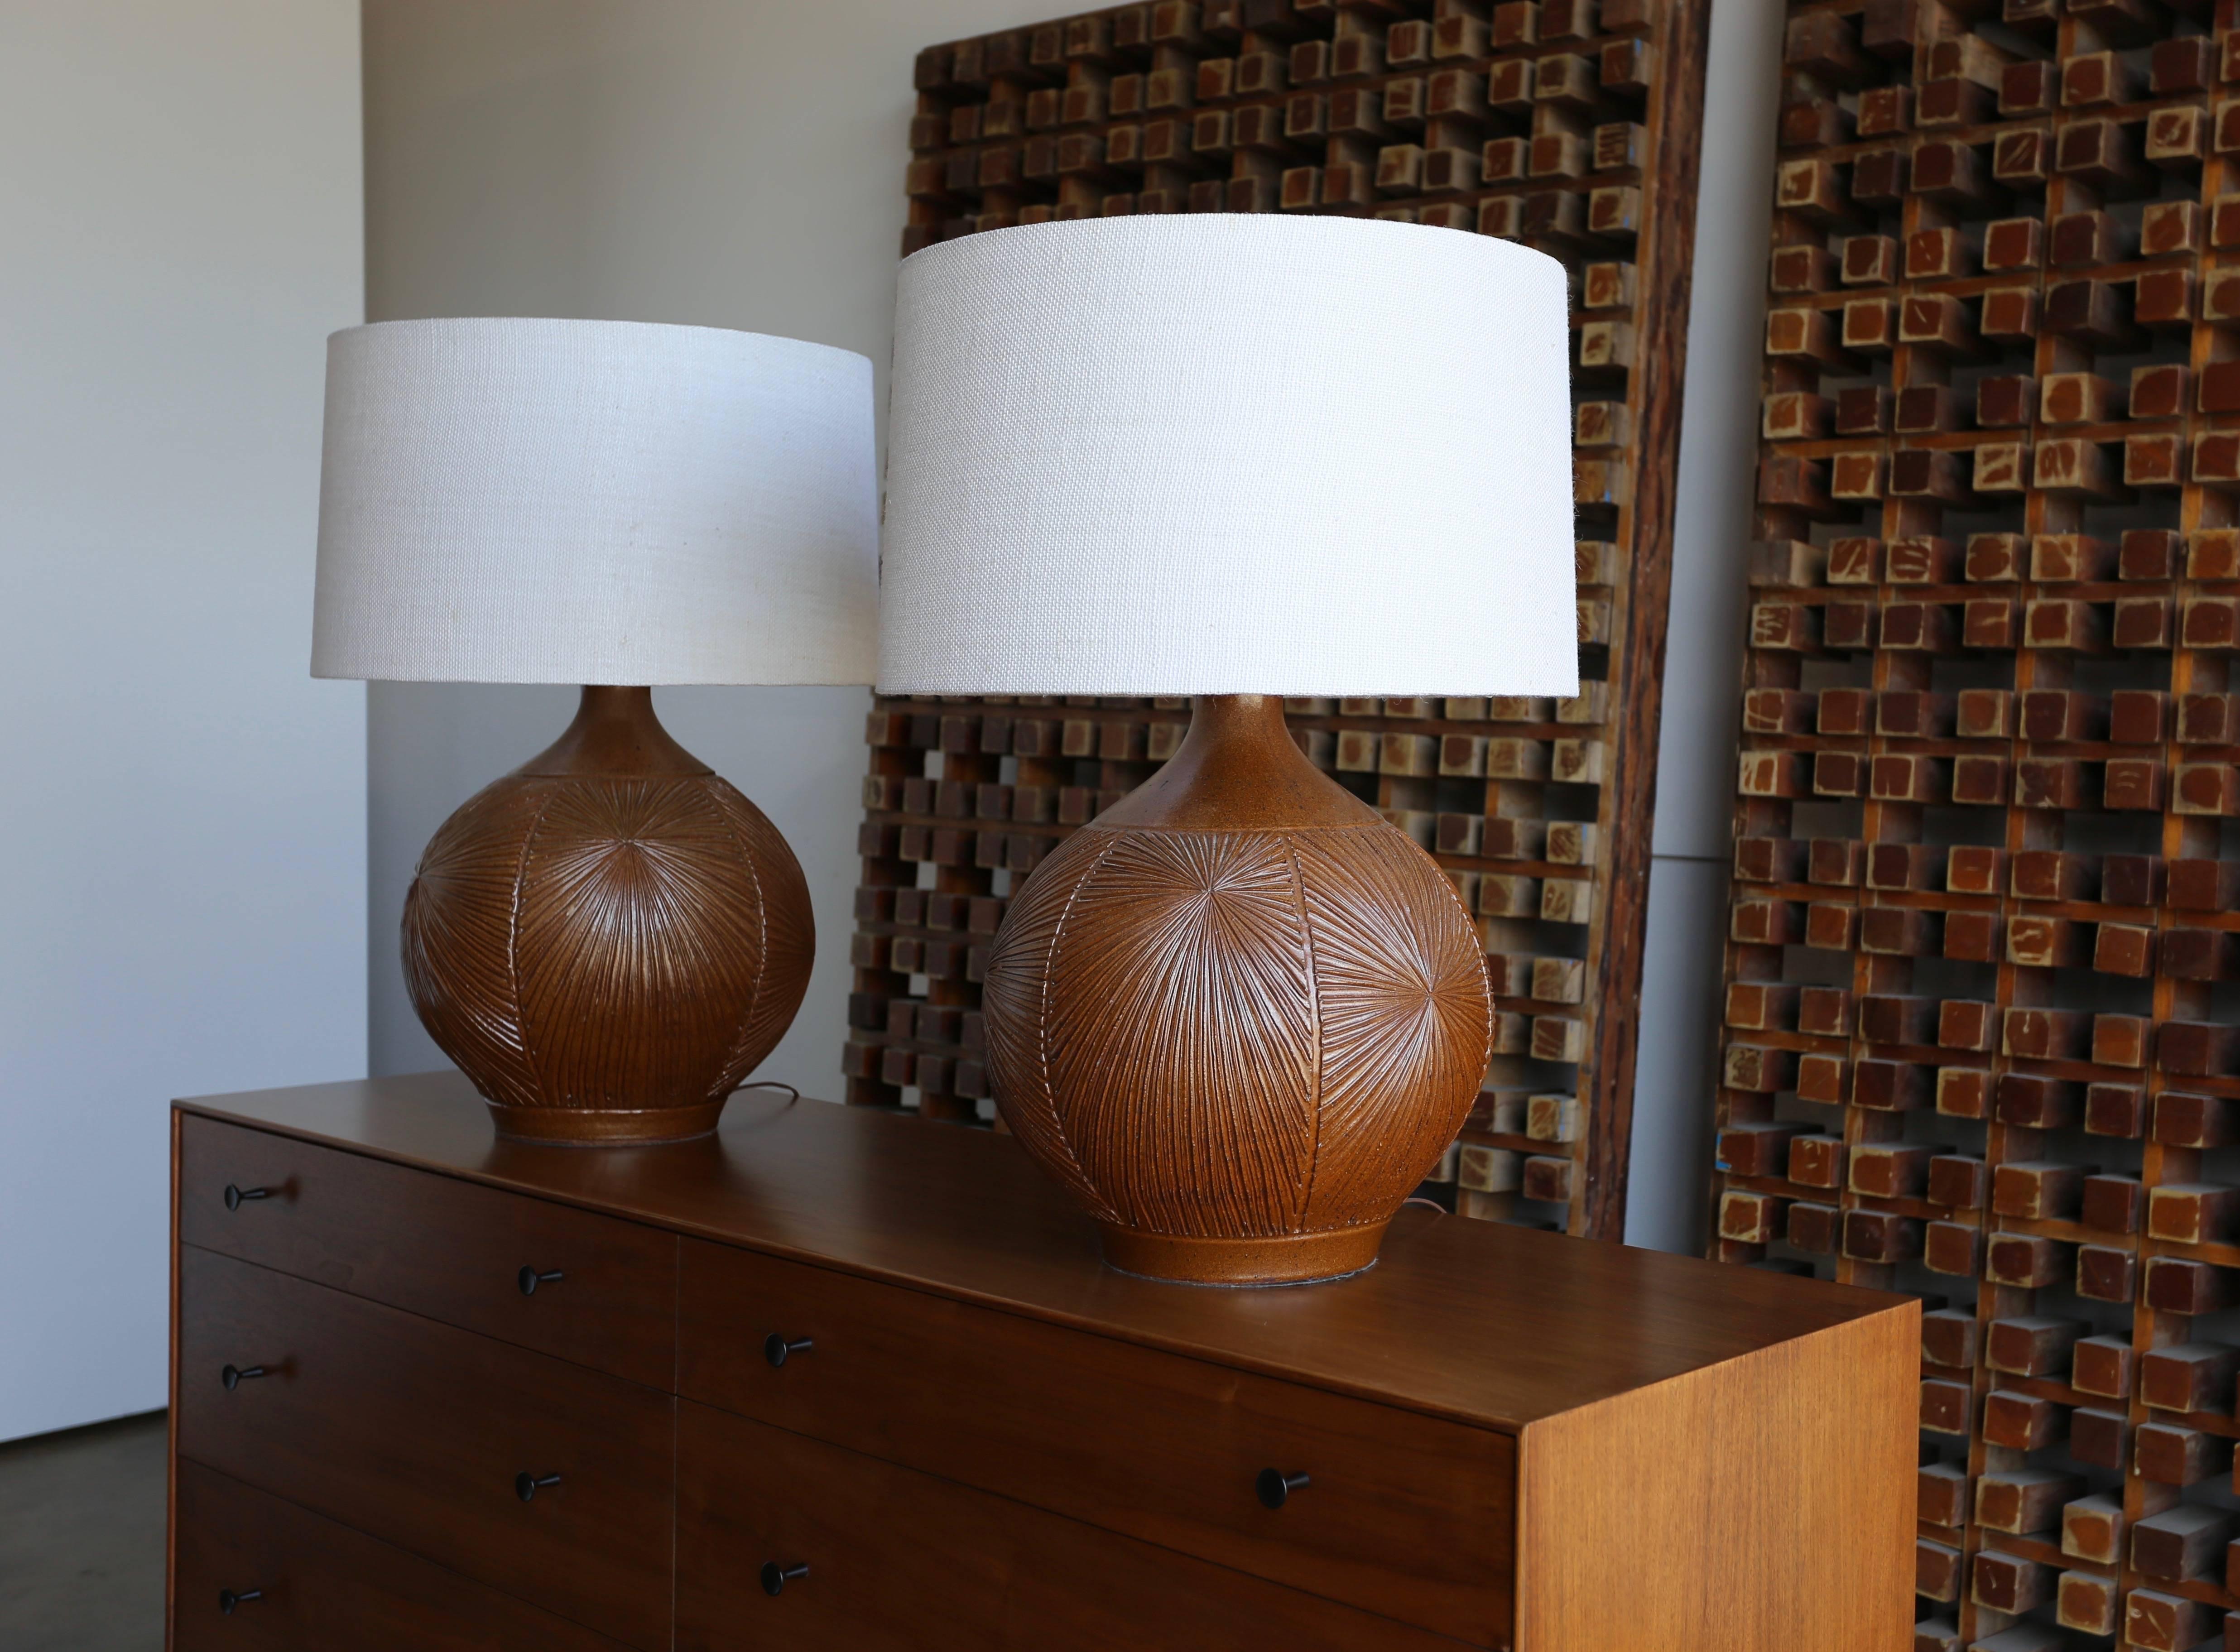 Large pair of ceramic earthgender table lamps by David Cressey Robert Maxwell. New custom shades. The listed measurements include the shades. This pair is a great example of California modern design.